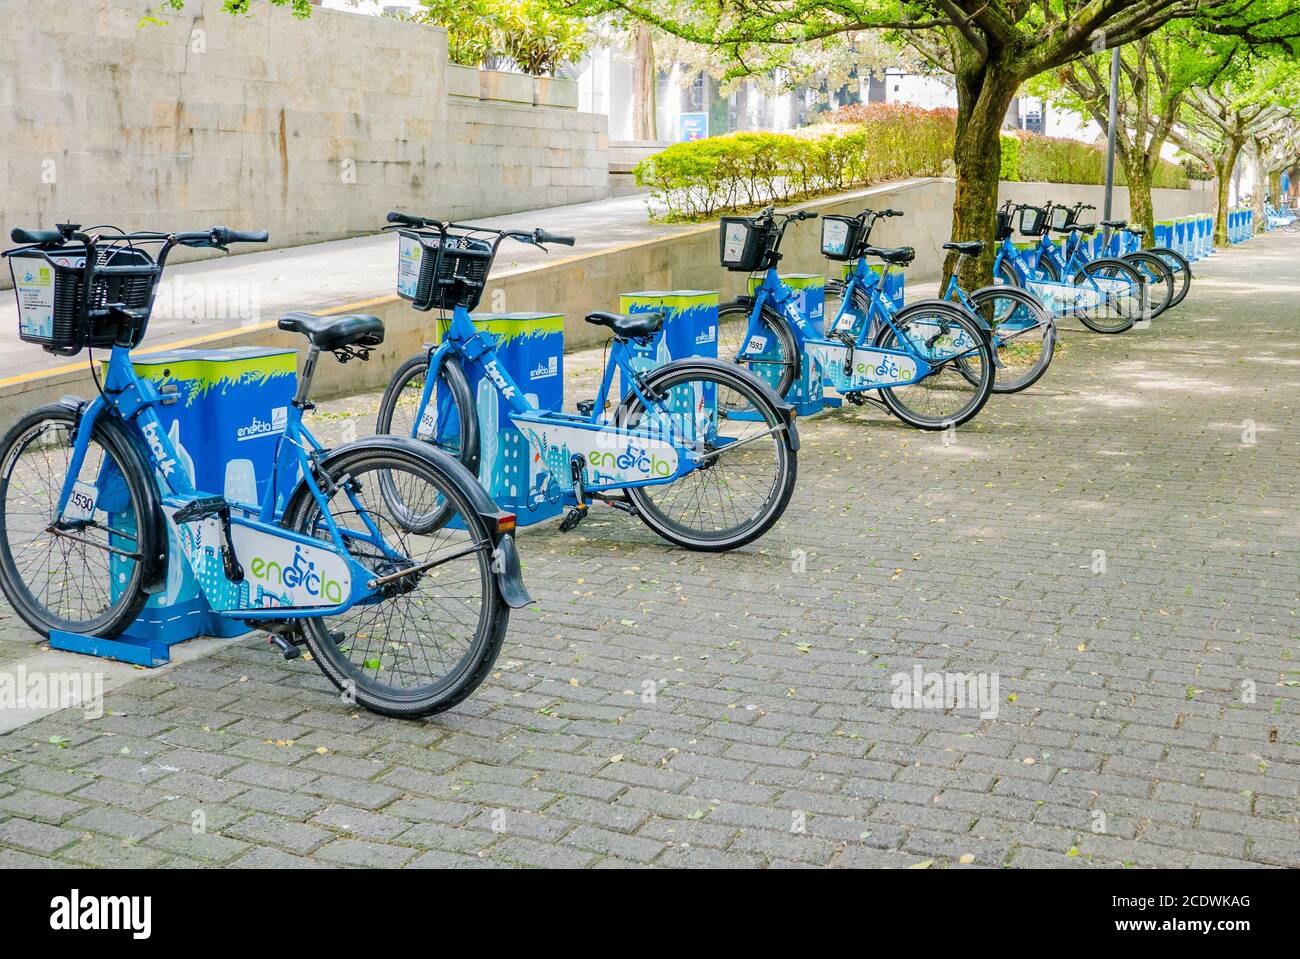 bicycles shared by the municipality of Medellin Colombia Stock Photo